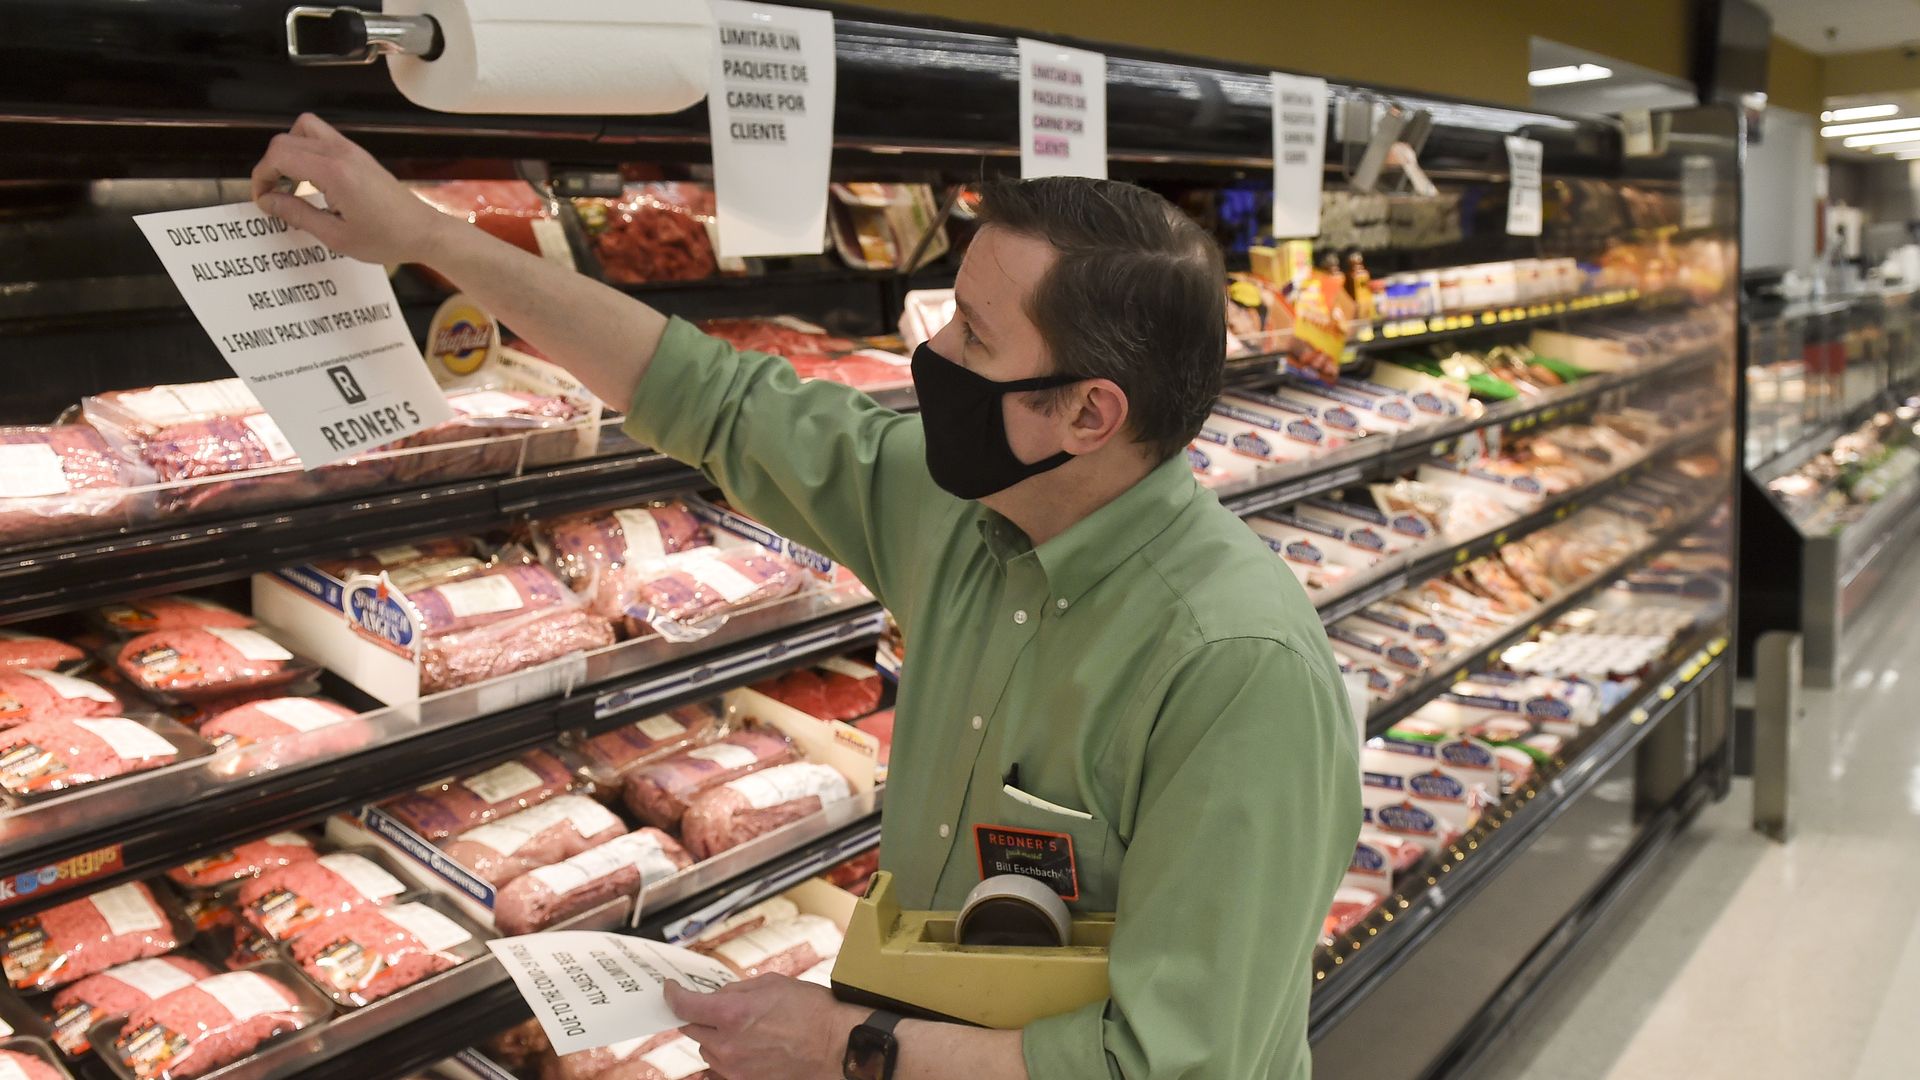 Store Director Bill Eschbach hangs up a sign in the beef section that reads "Due to the COVID-19 virus all sales of beef are limited to 1 family pack unit per family."